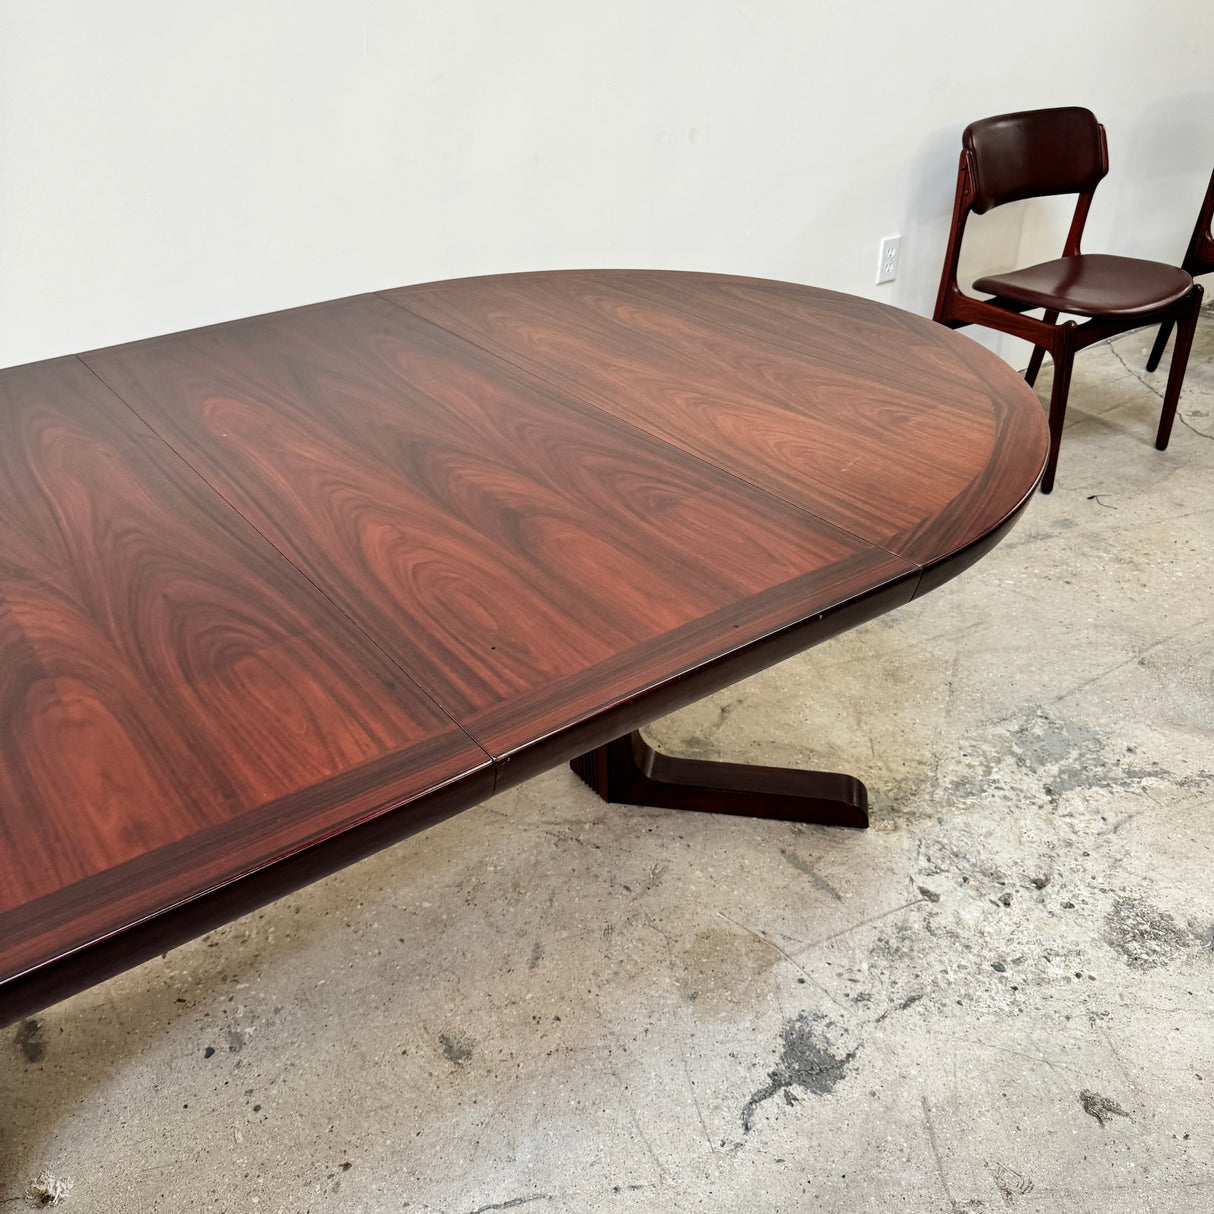 Danish Modern Rosewood Extension Dining Table by Skovby